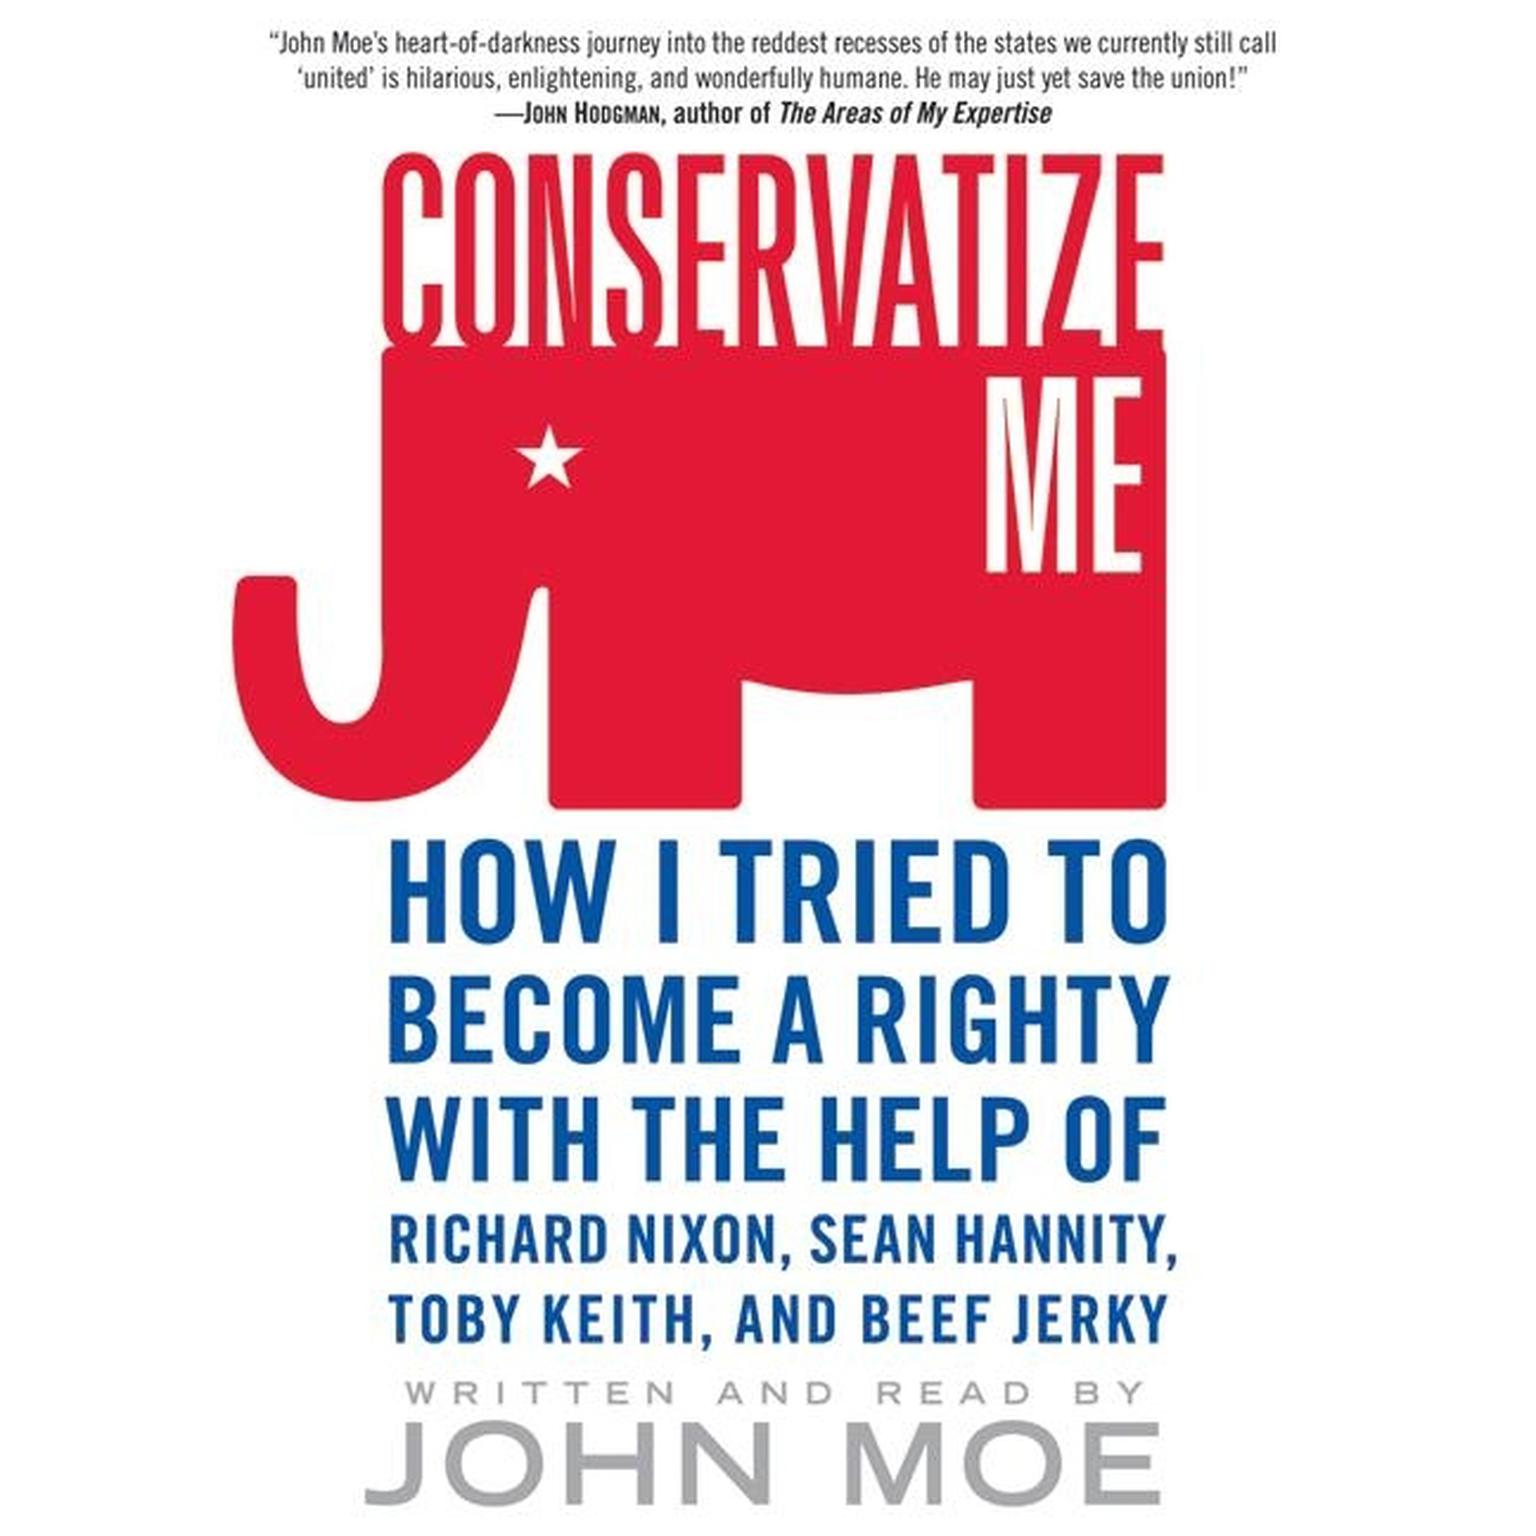 Conservatize Me (Abridged): How I Tried to Become a Righty with the Help of Richard Nixon, Sean Hannity, Toby Keith, and Beef Jerky Audiobook, by John Moe